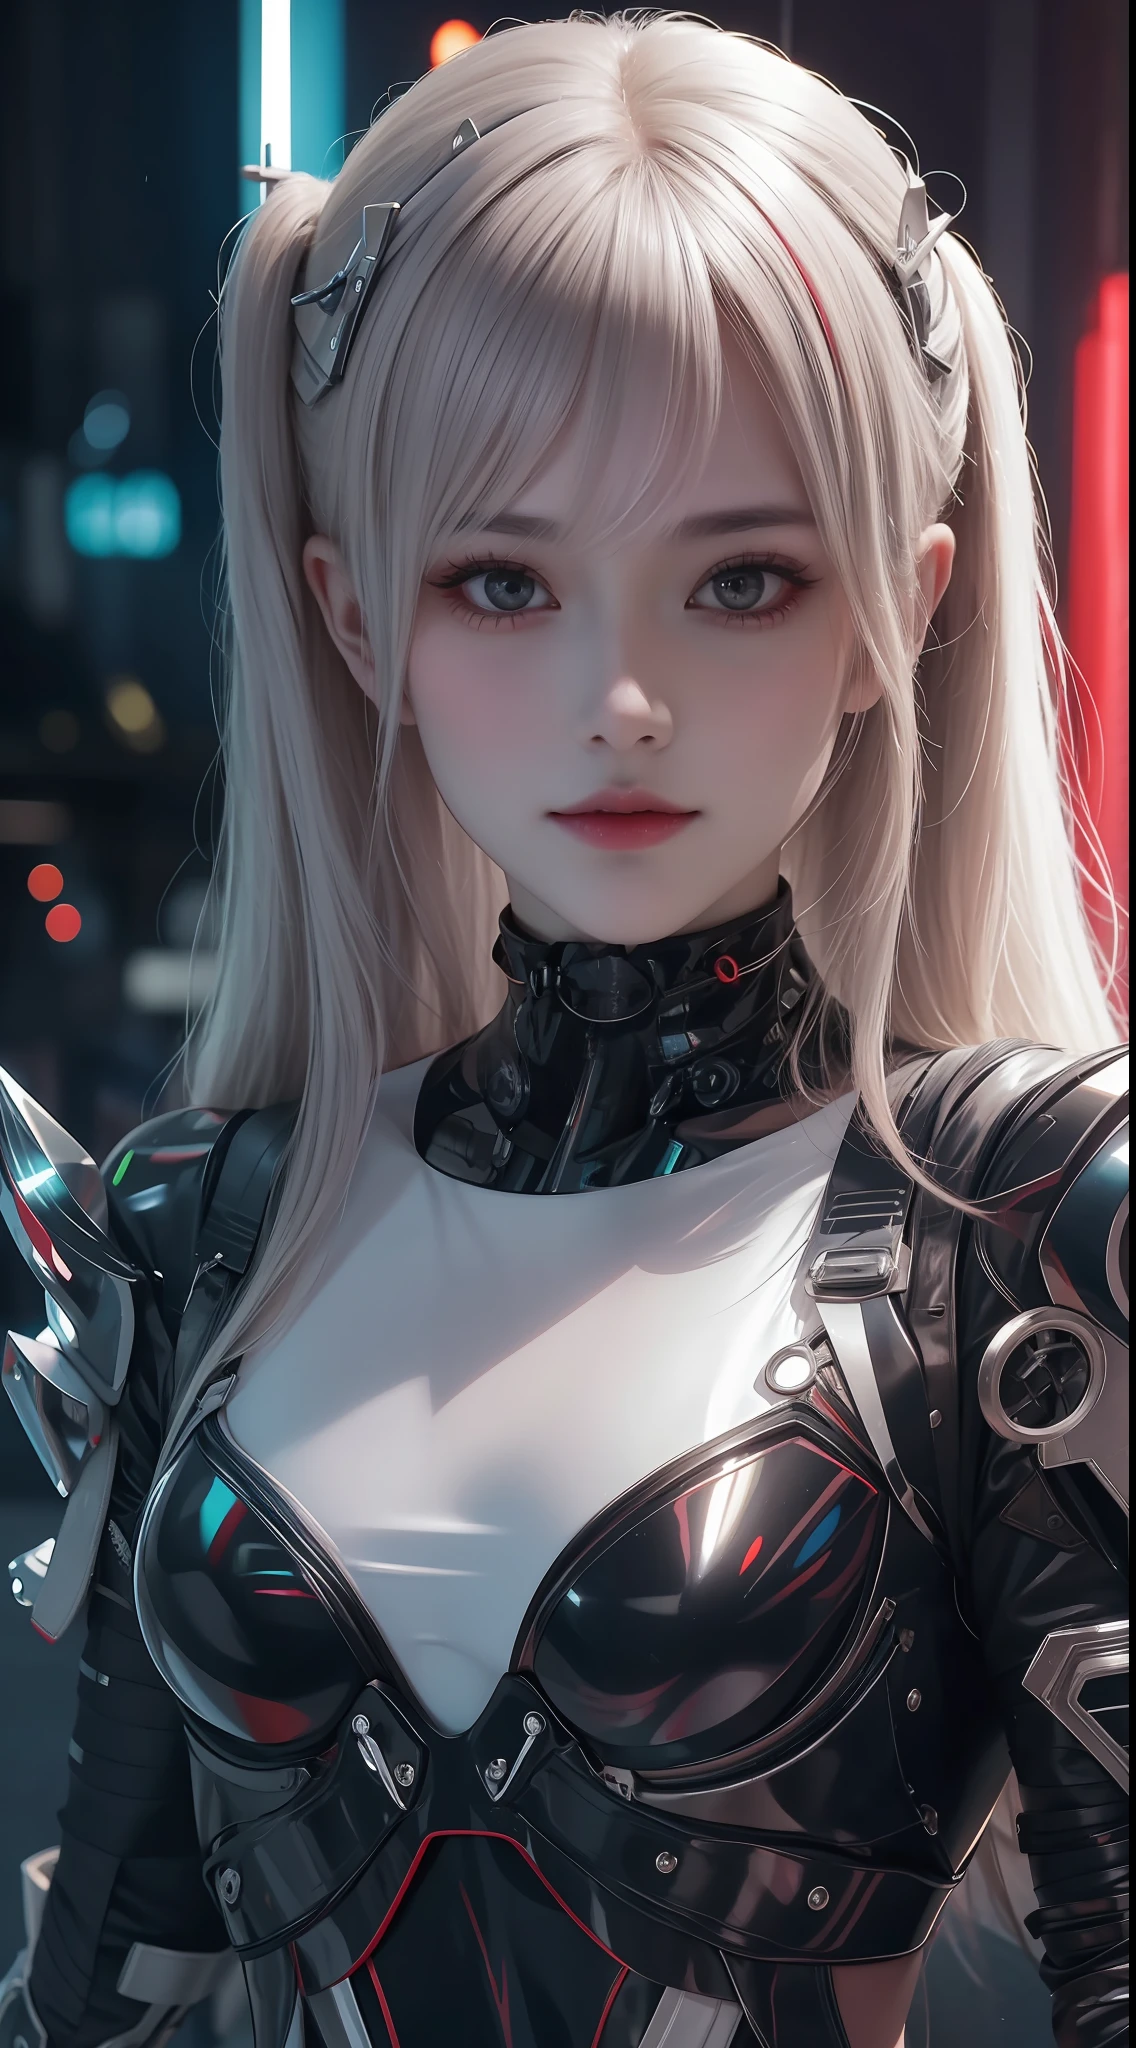 8K uhd, materpiece, a beautiful girl, detaild eye, good face, detaild eyebrow, cyberpunk outfit, white outfit, cyberpunk, Cyberspace, cyberpunk shining background, neon effect, Spreading lighting, red lighting, whole body capture,